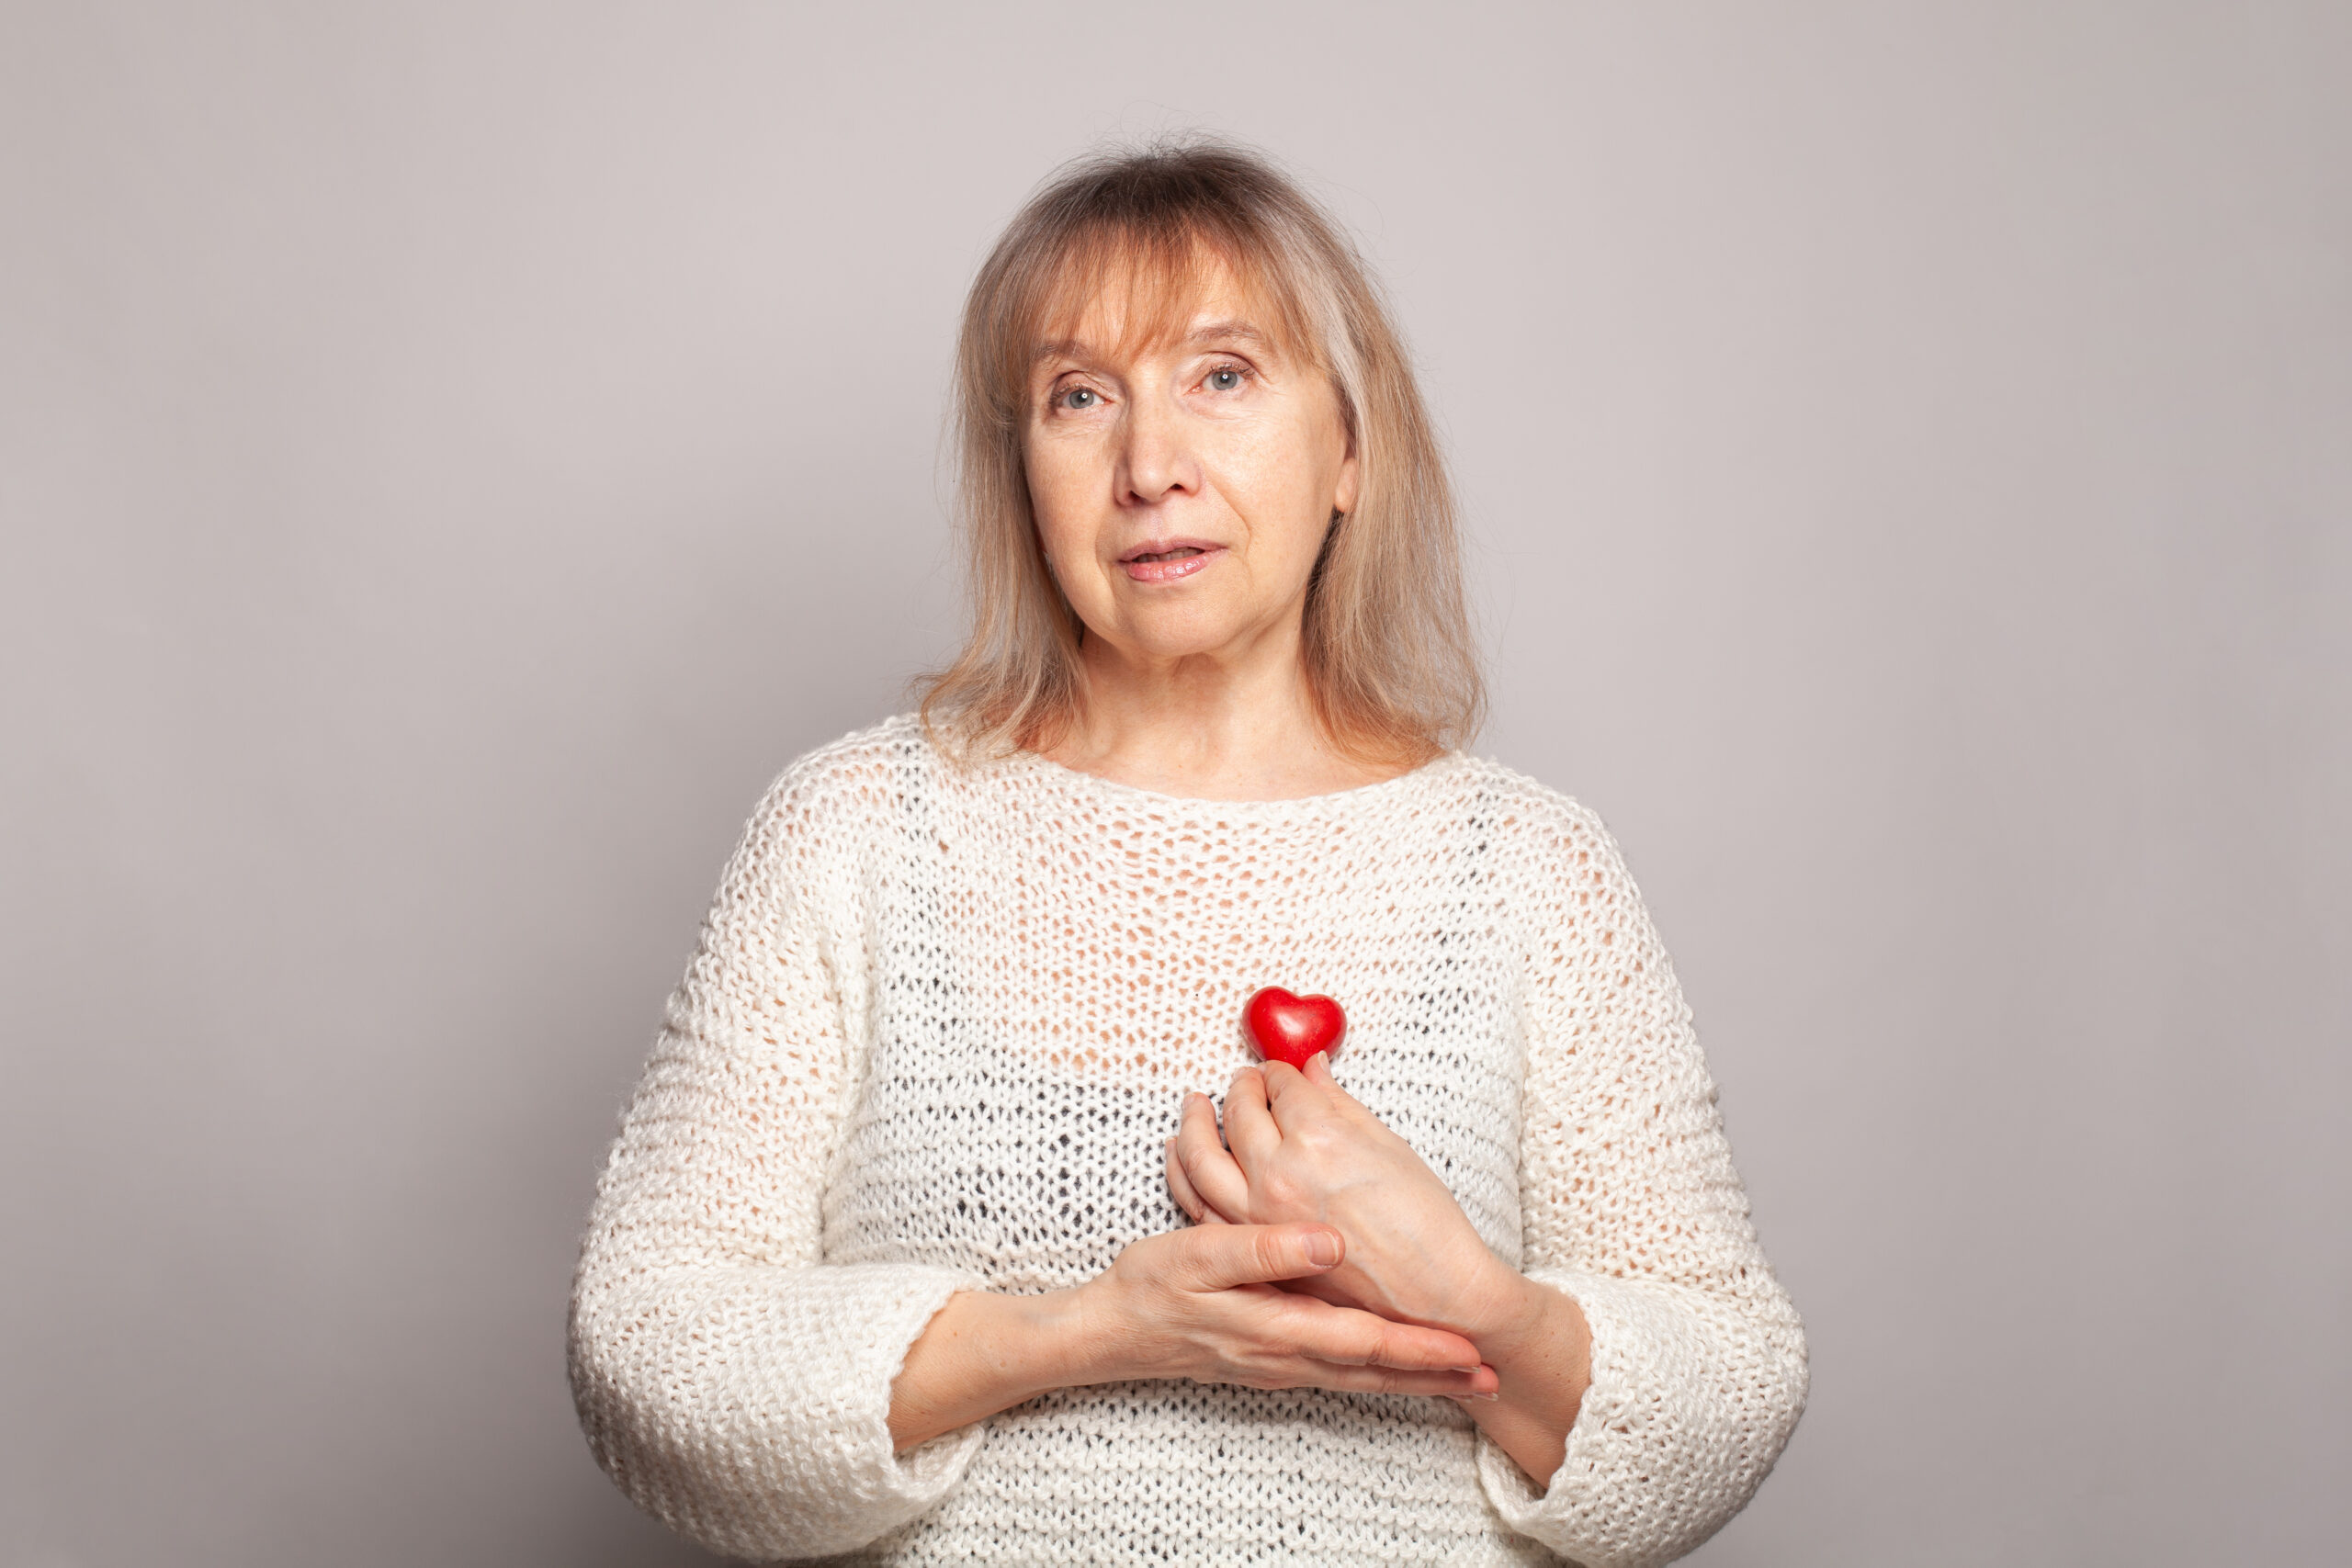 Heart health and metabolic changes are important considerations, especially during menopause. 